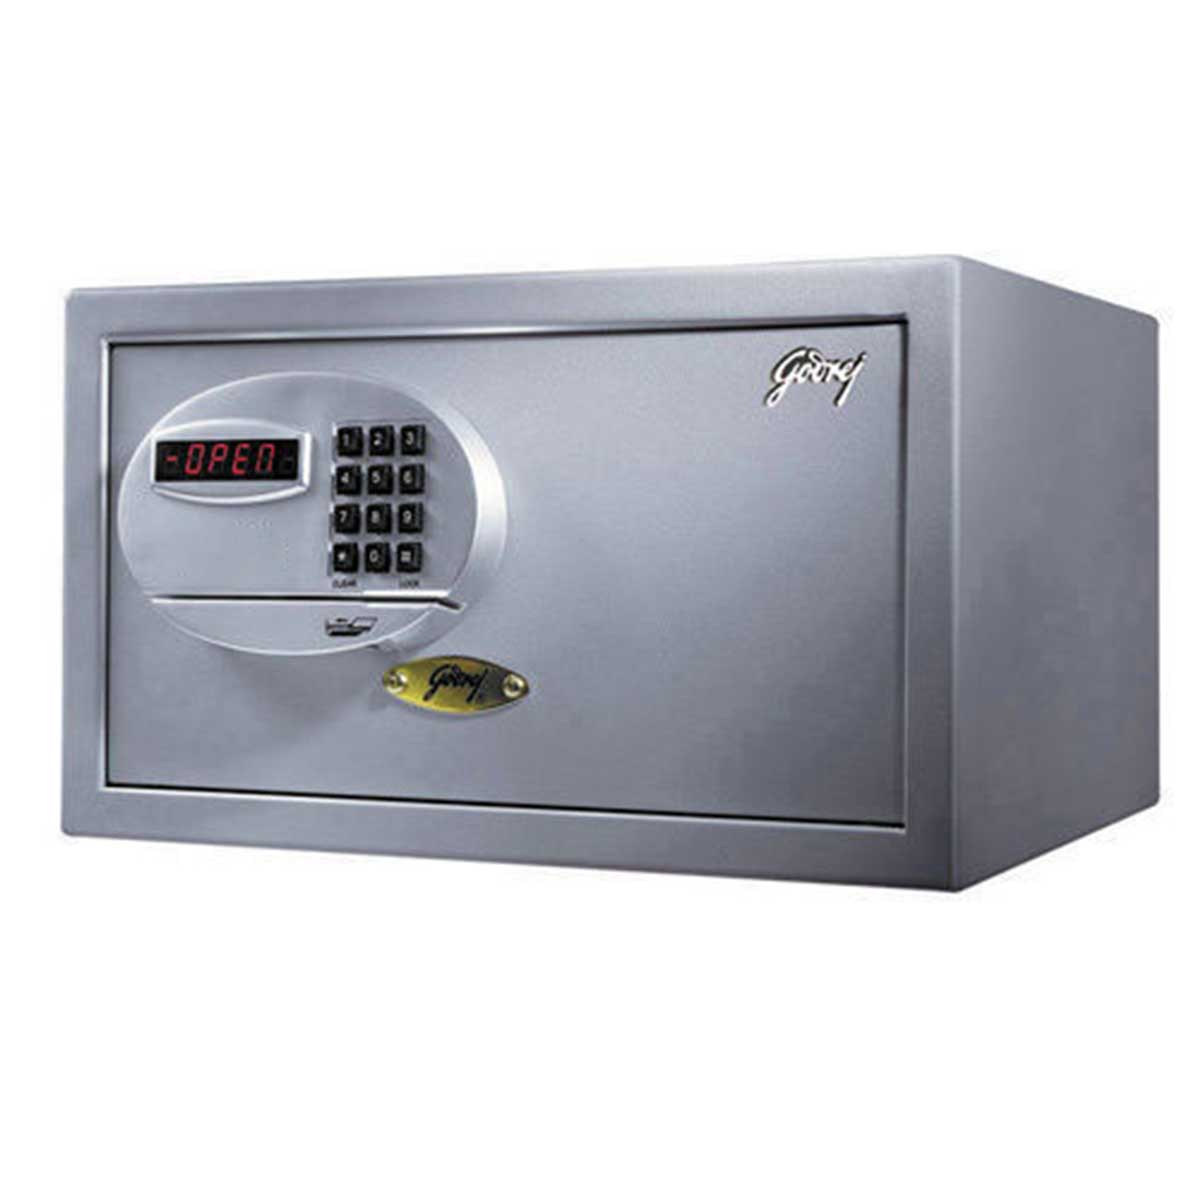 Electronic locker Manufacturers, Suppliers in Faridabad